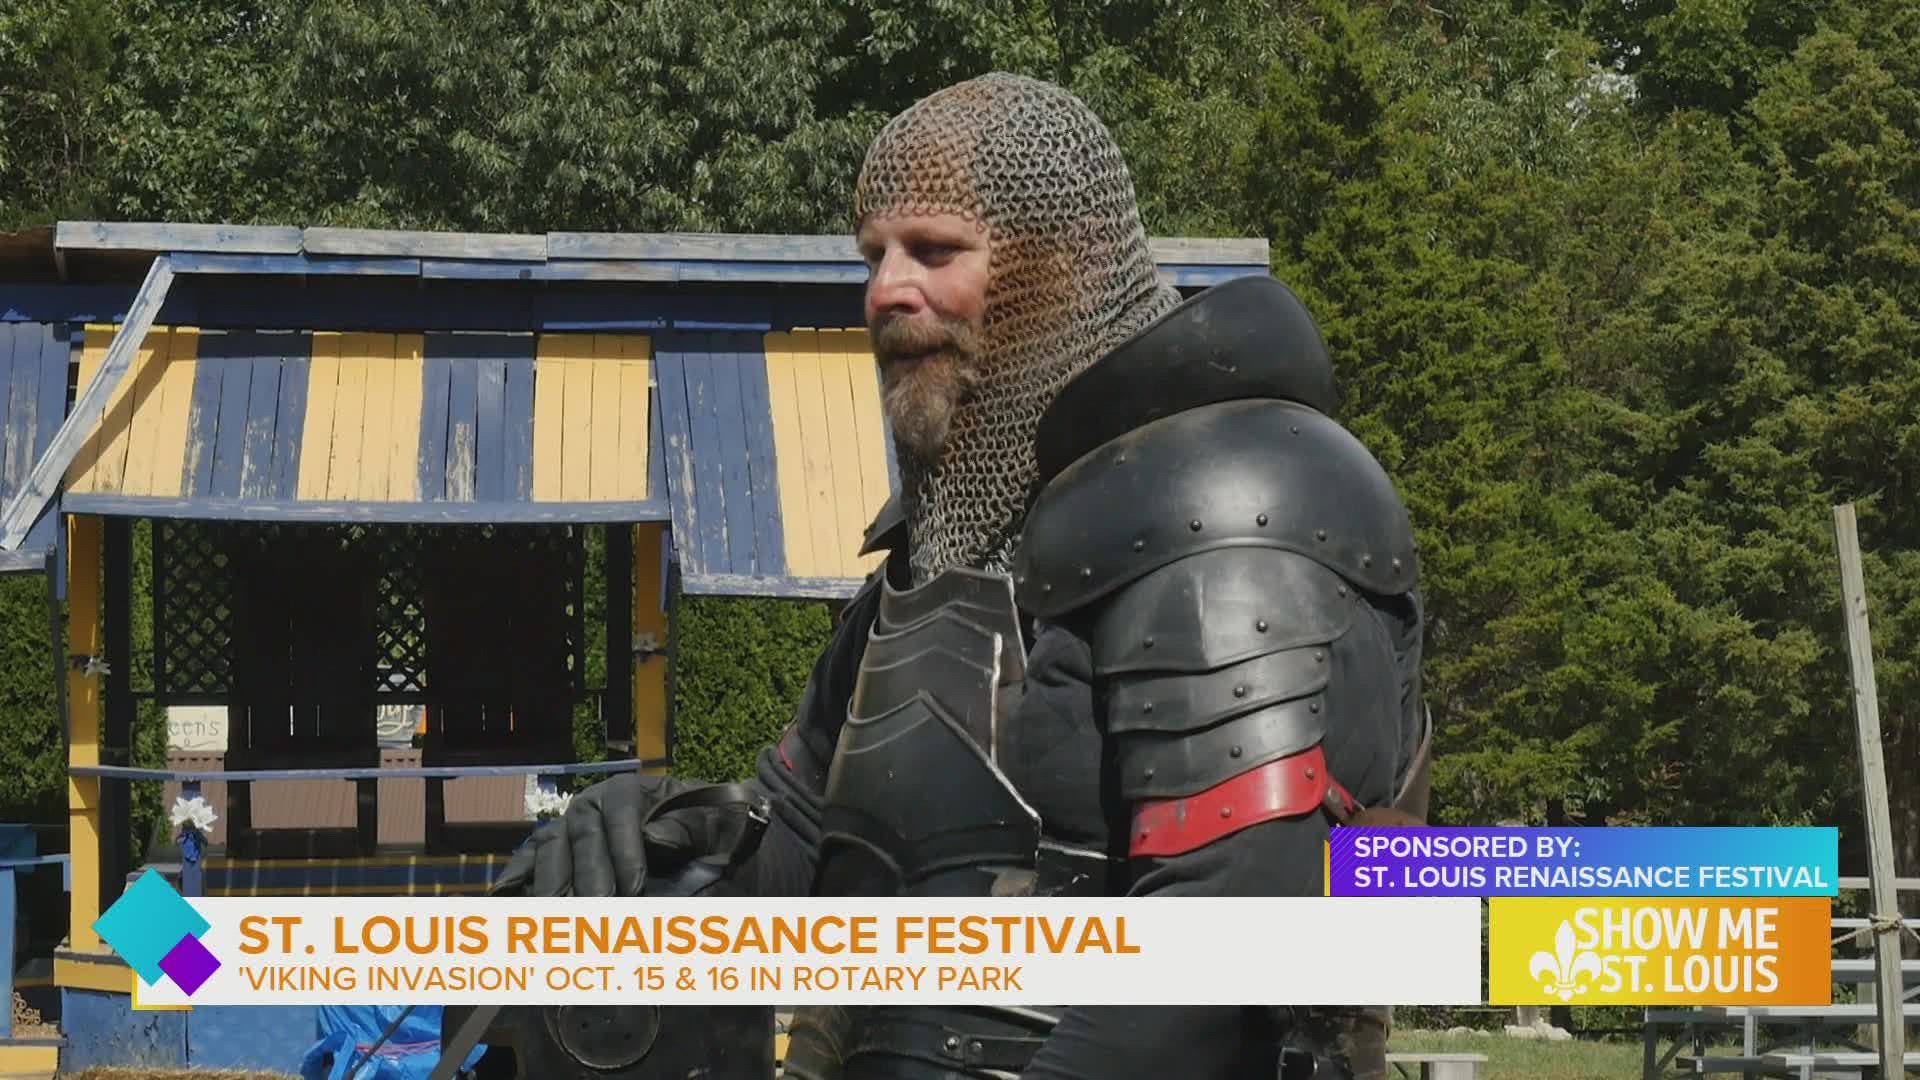 Grab your horns and helmets for a Viking Invasion on October 15 and 16 at the St. Louis Renaissance Festival!